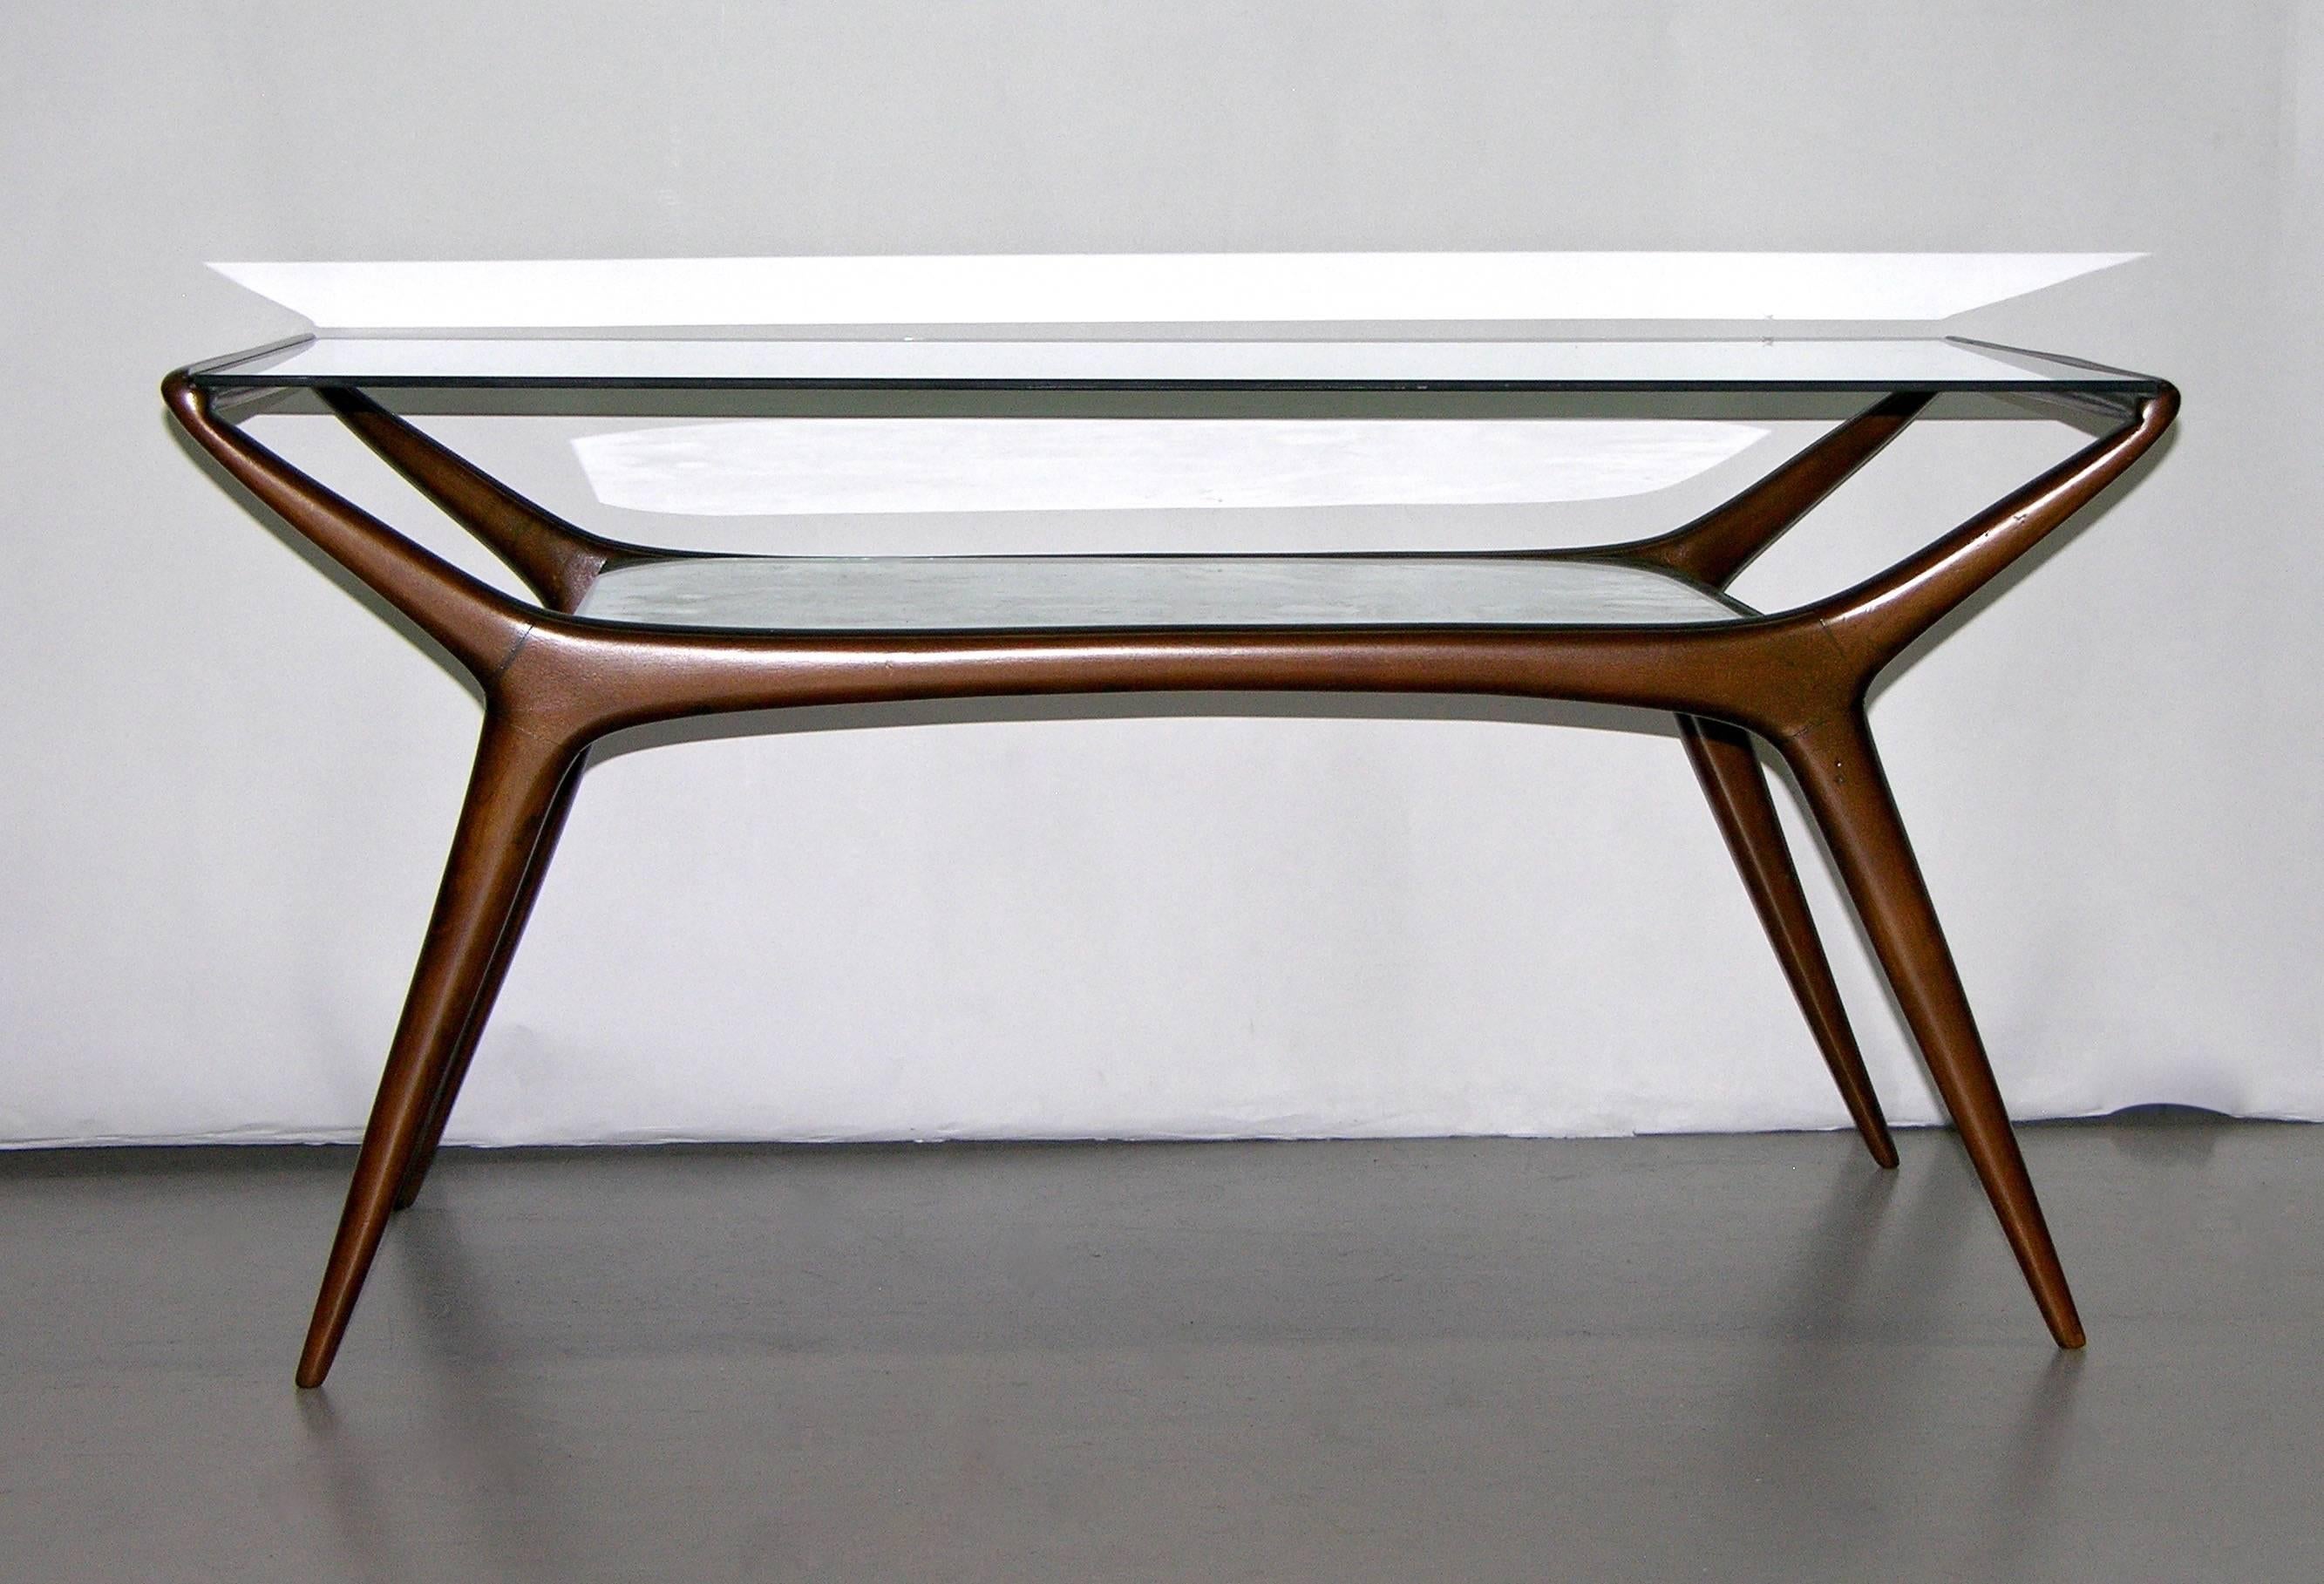 Hand-Crafted Ico Parisi 1950s Italian Modern Two-Tier Mahogany and Glass Sofa or Coffee Table